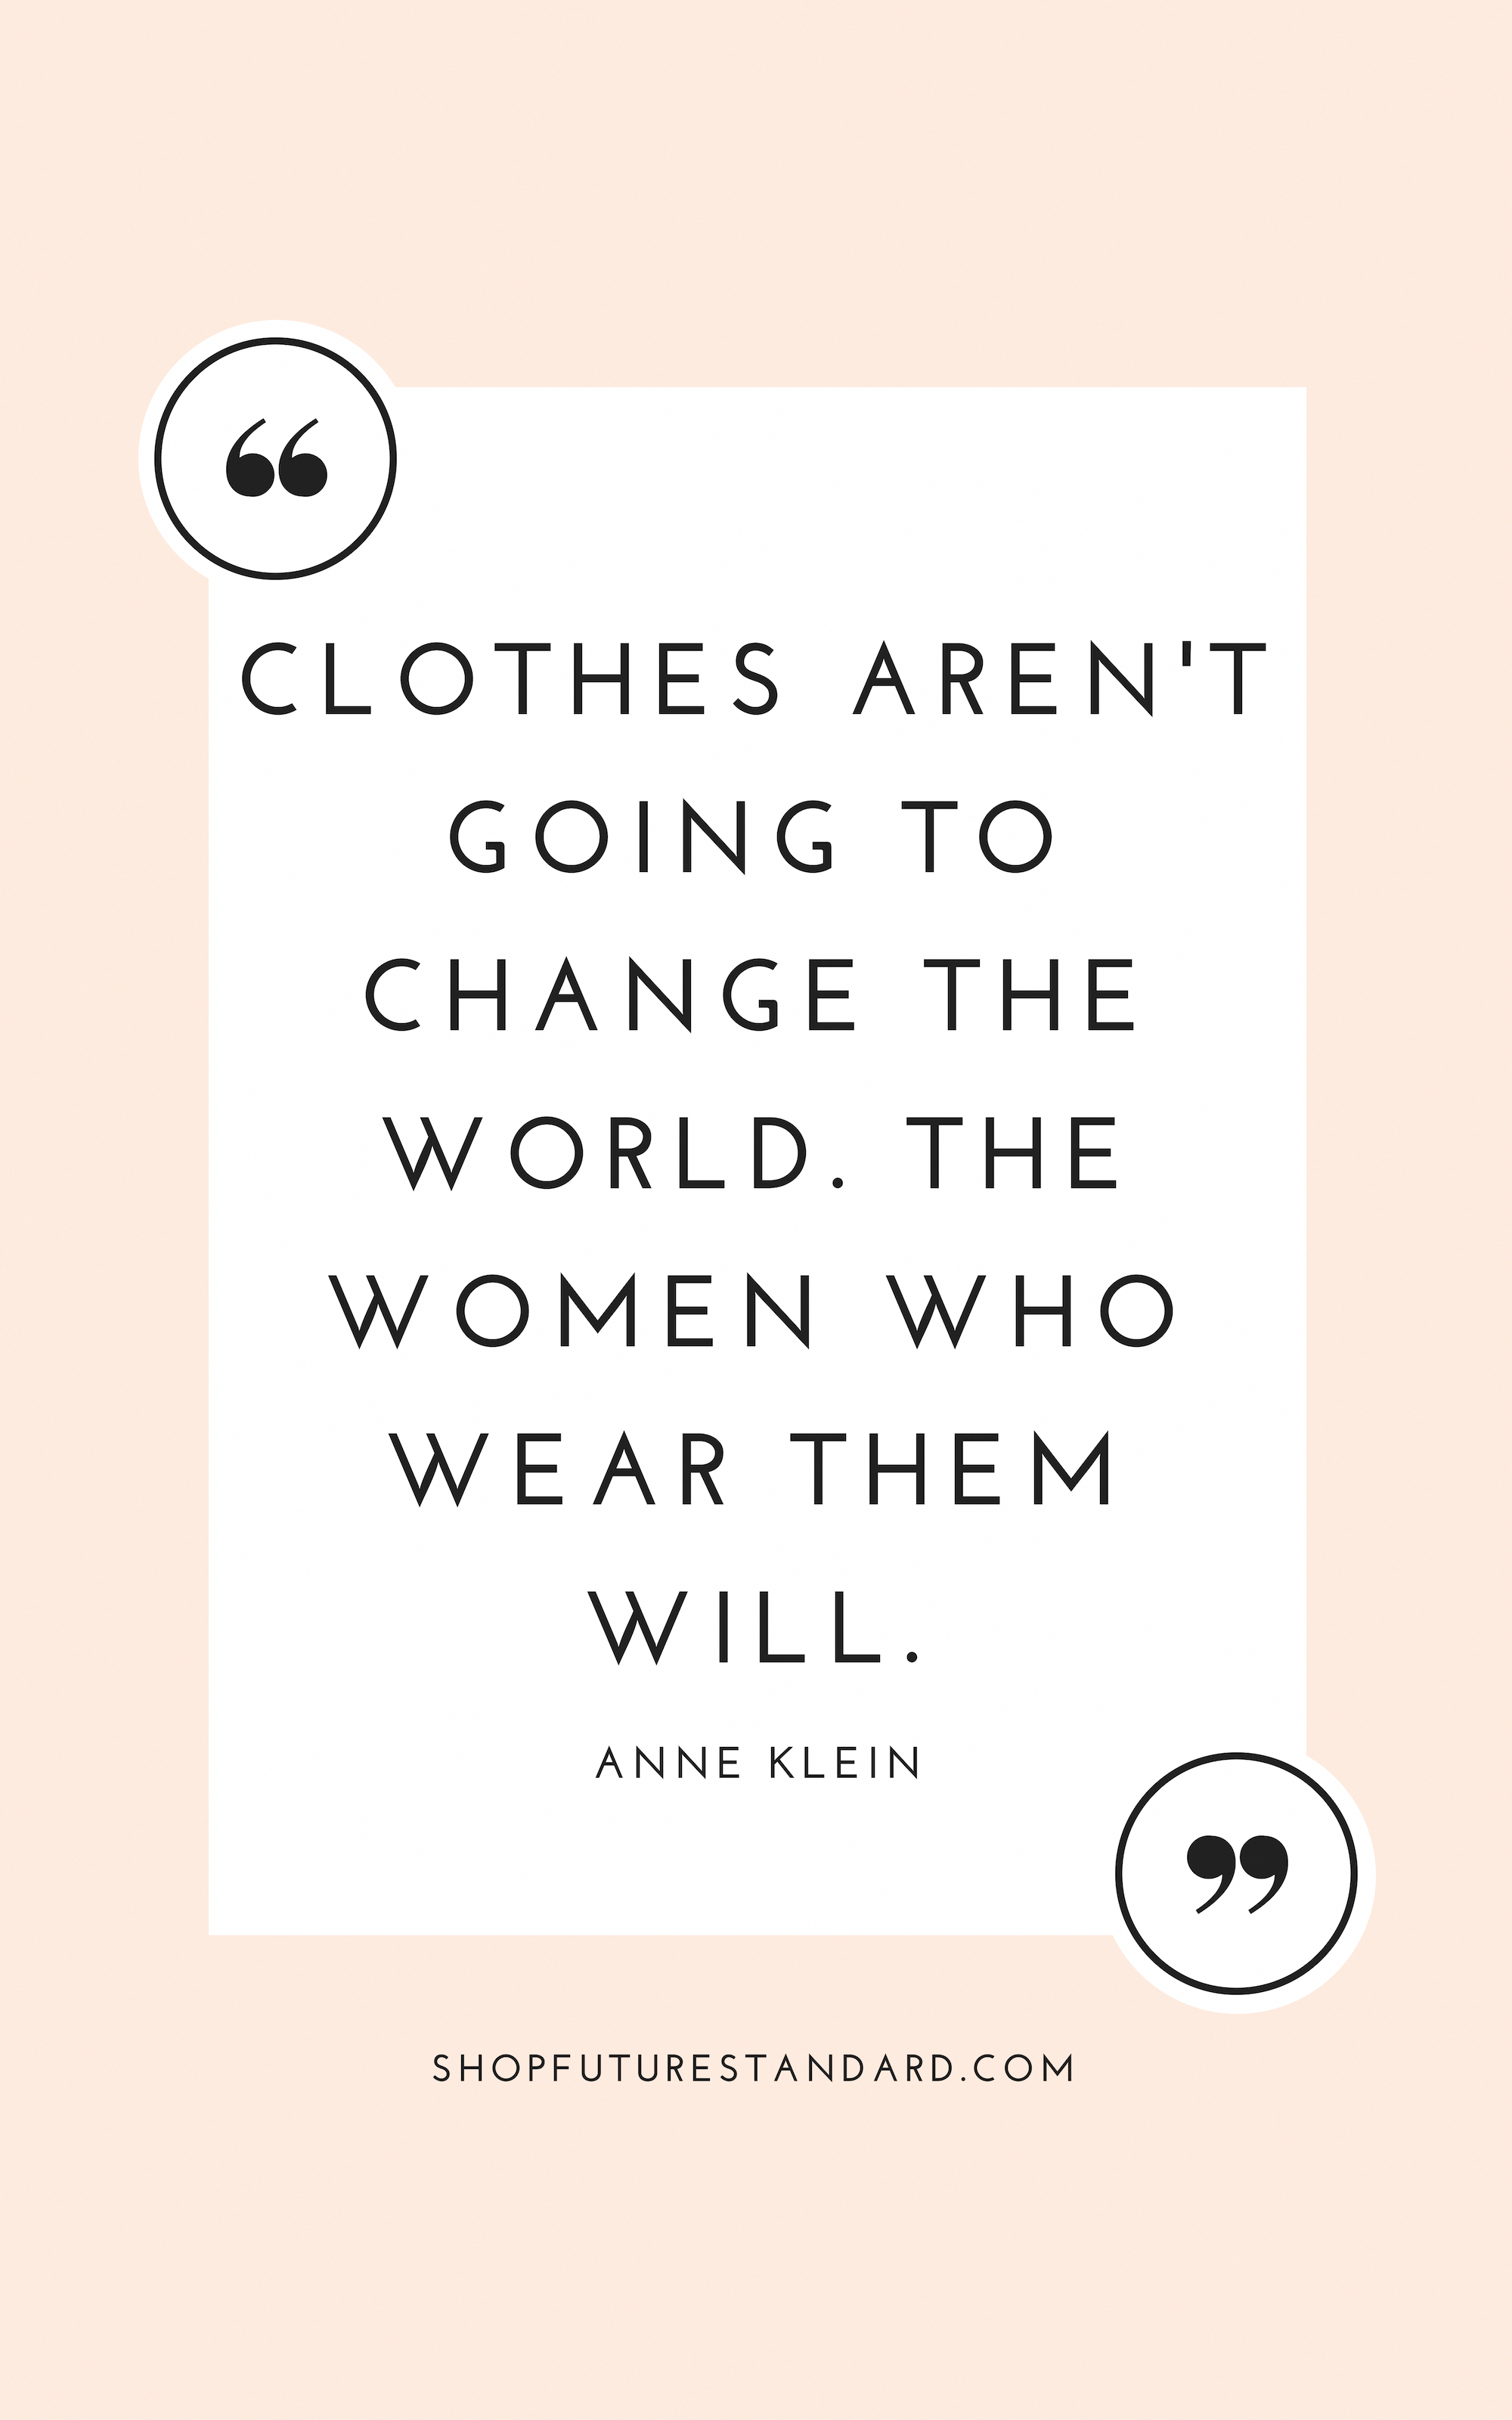 11 Ethical Style Quotes to Inspire More Conscious Living - 11 Ethical Style Quotes to Inspire More Conscious Living -   16 new style Quotes ideas